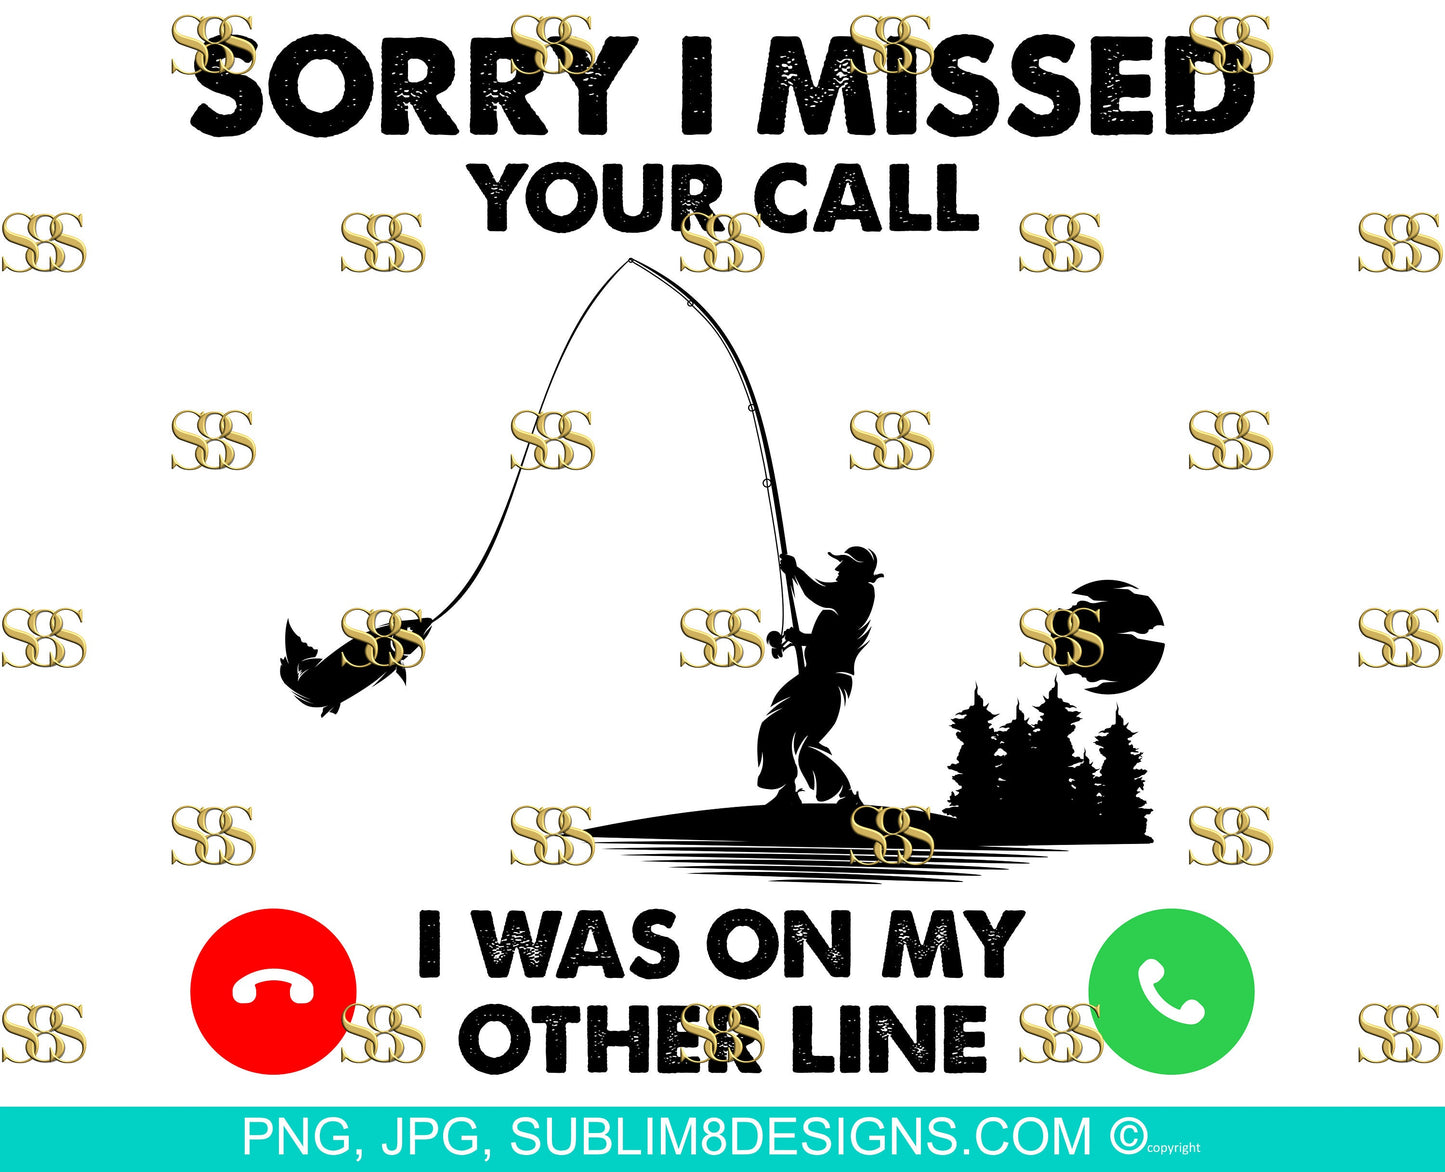 Sorry I Missed Your Call I Was On My Other Line - Fishing Themed - Sublimation Design